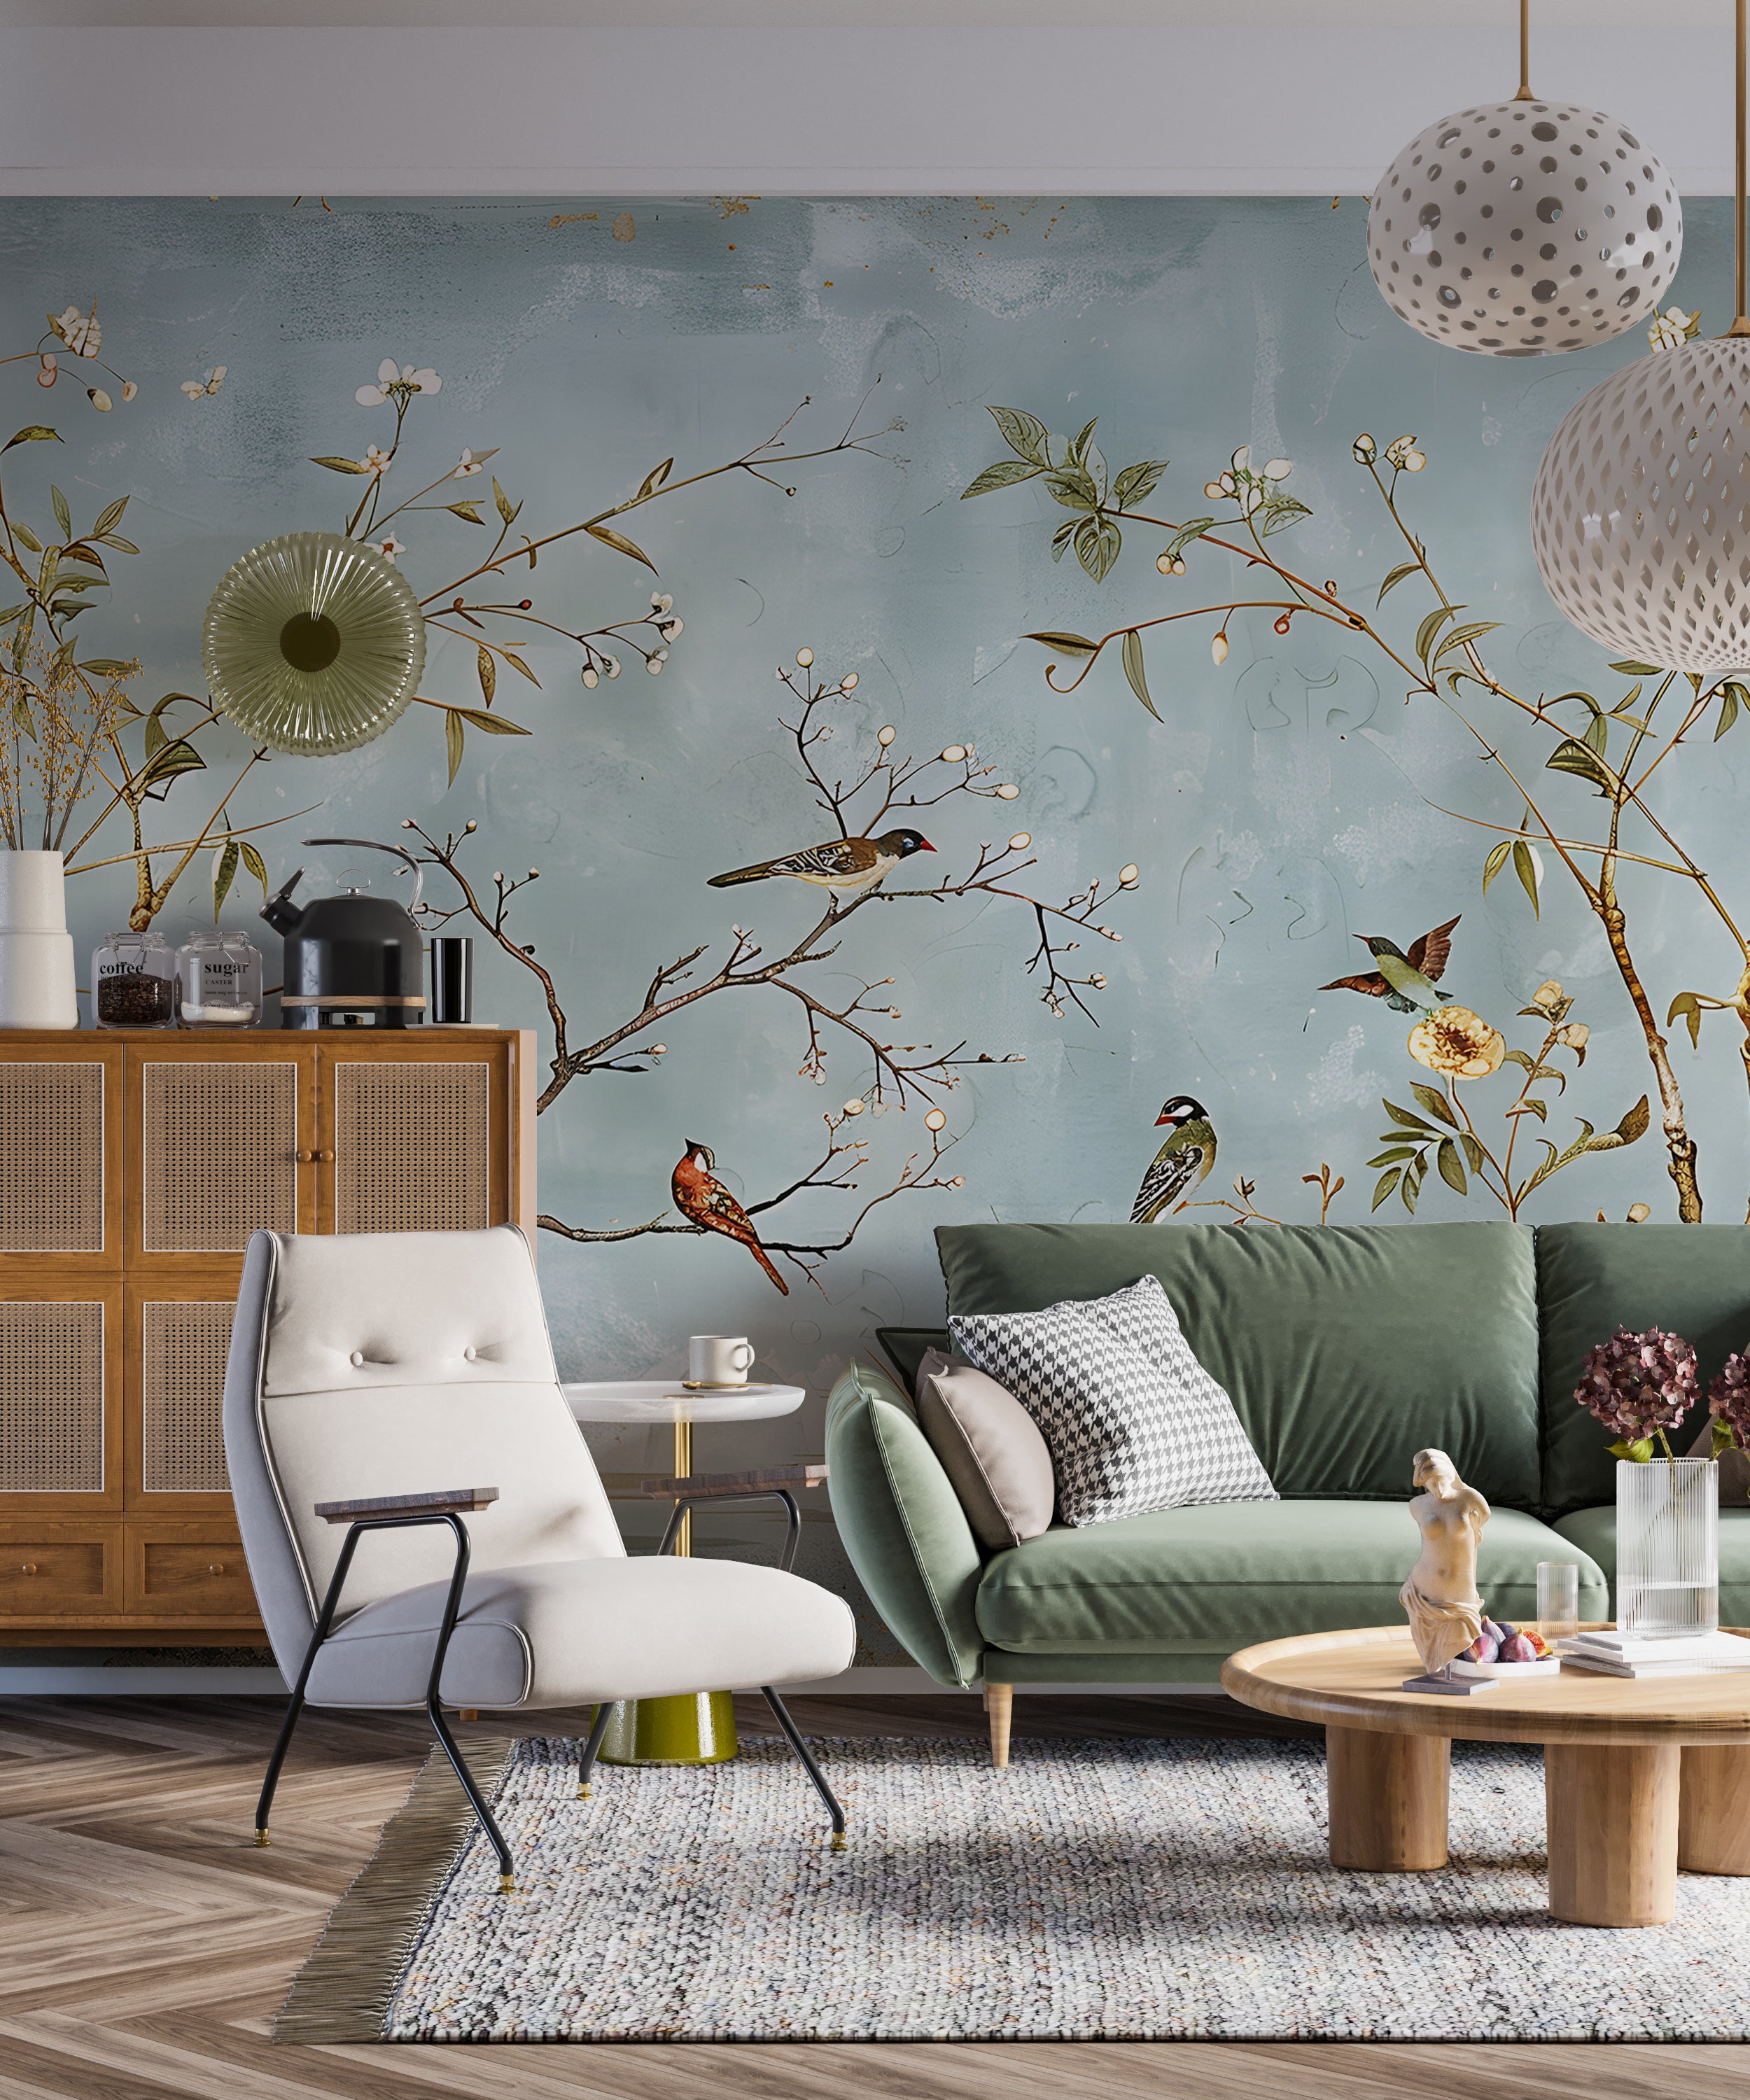 Light Blue Chinoiserie Birds on Trees Wallpaper Pastel Color Botanical Peel and Stick Mural